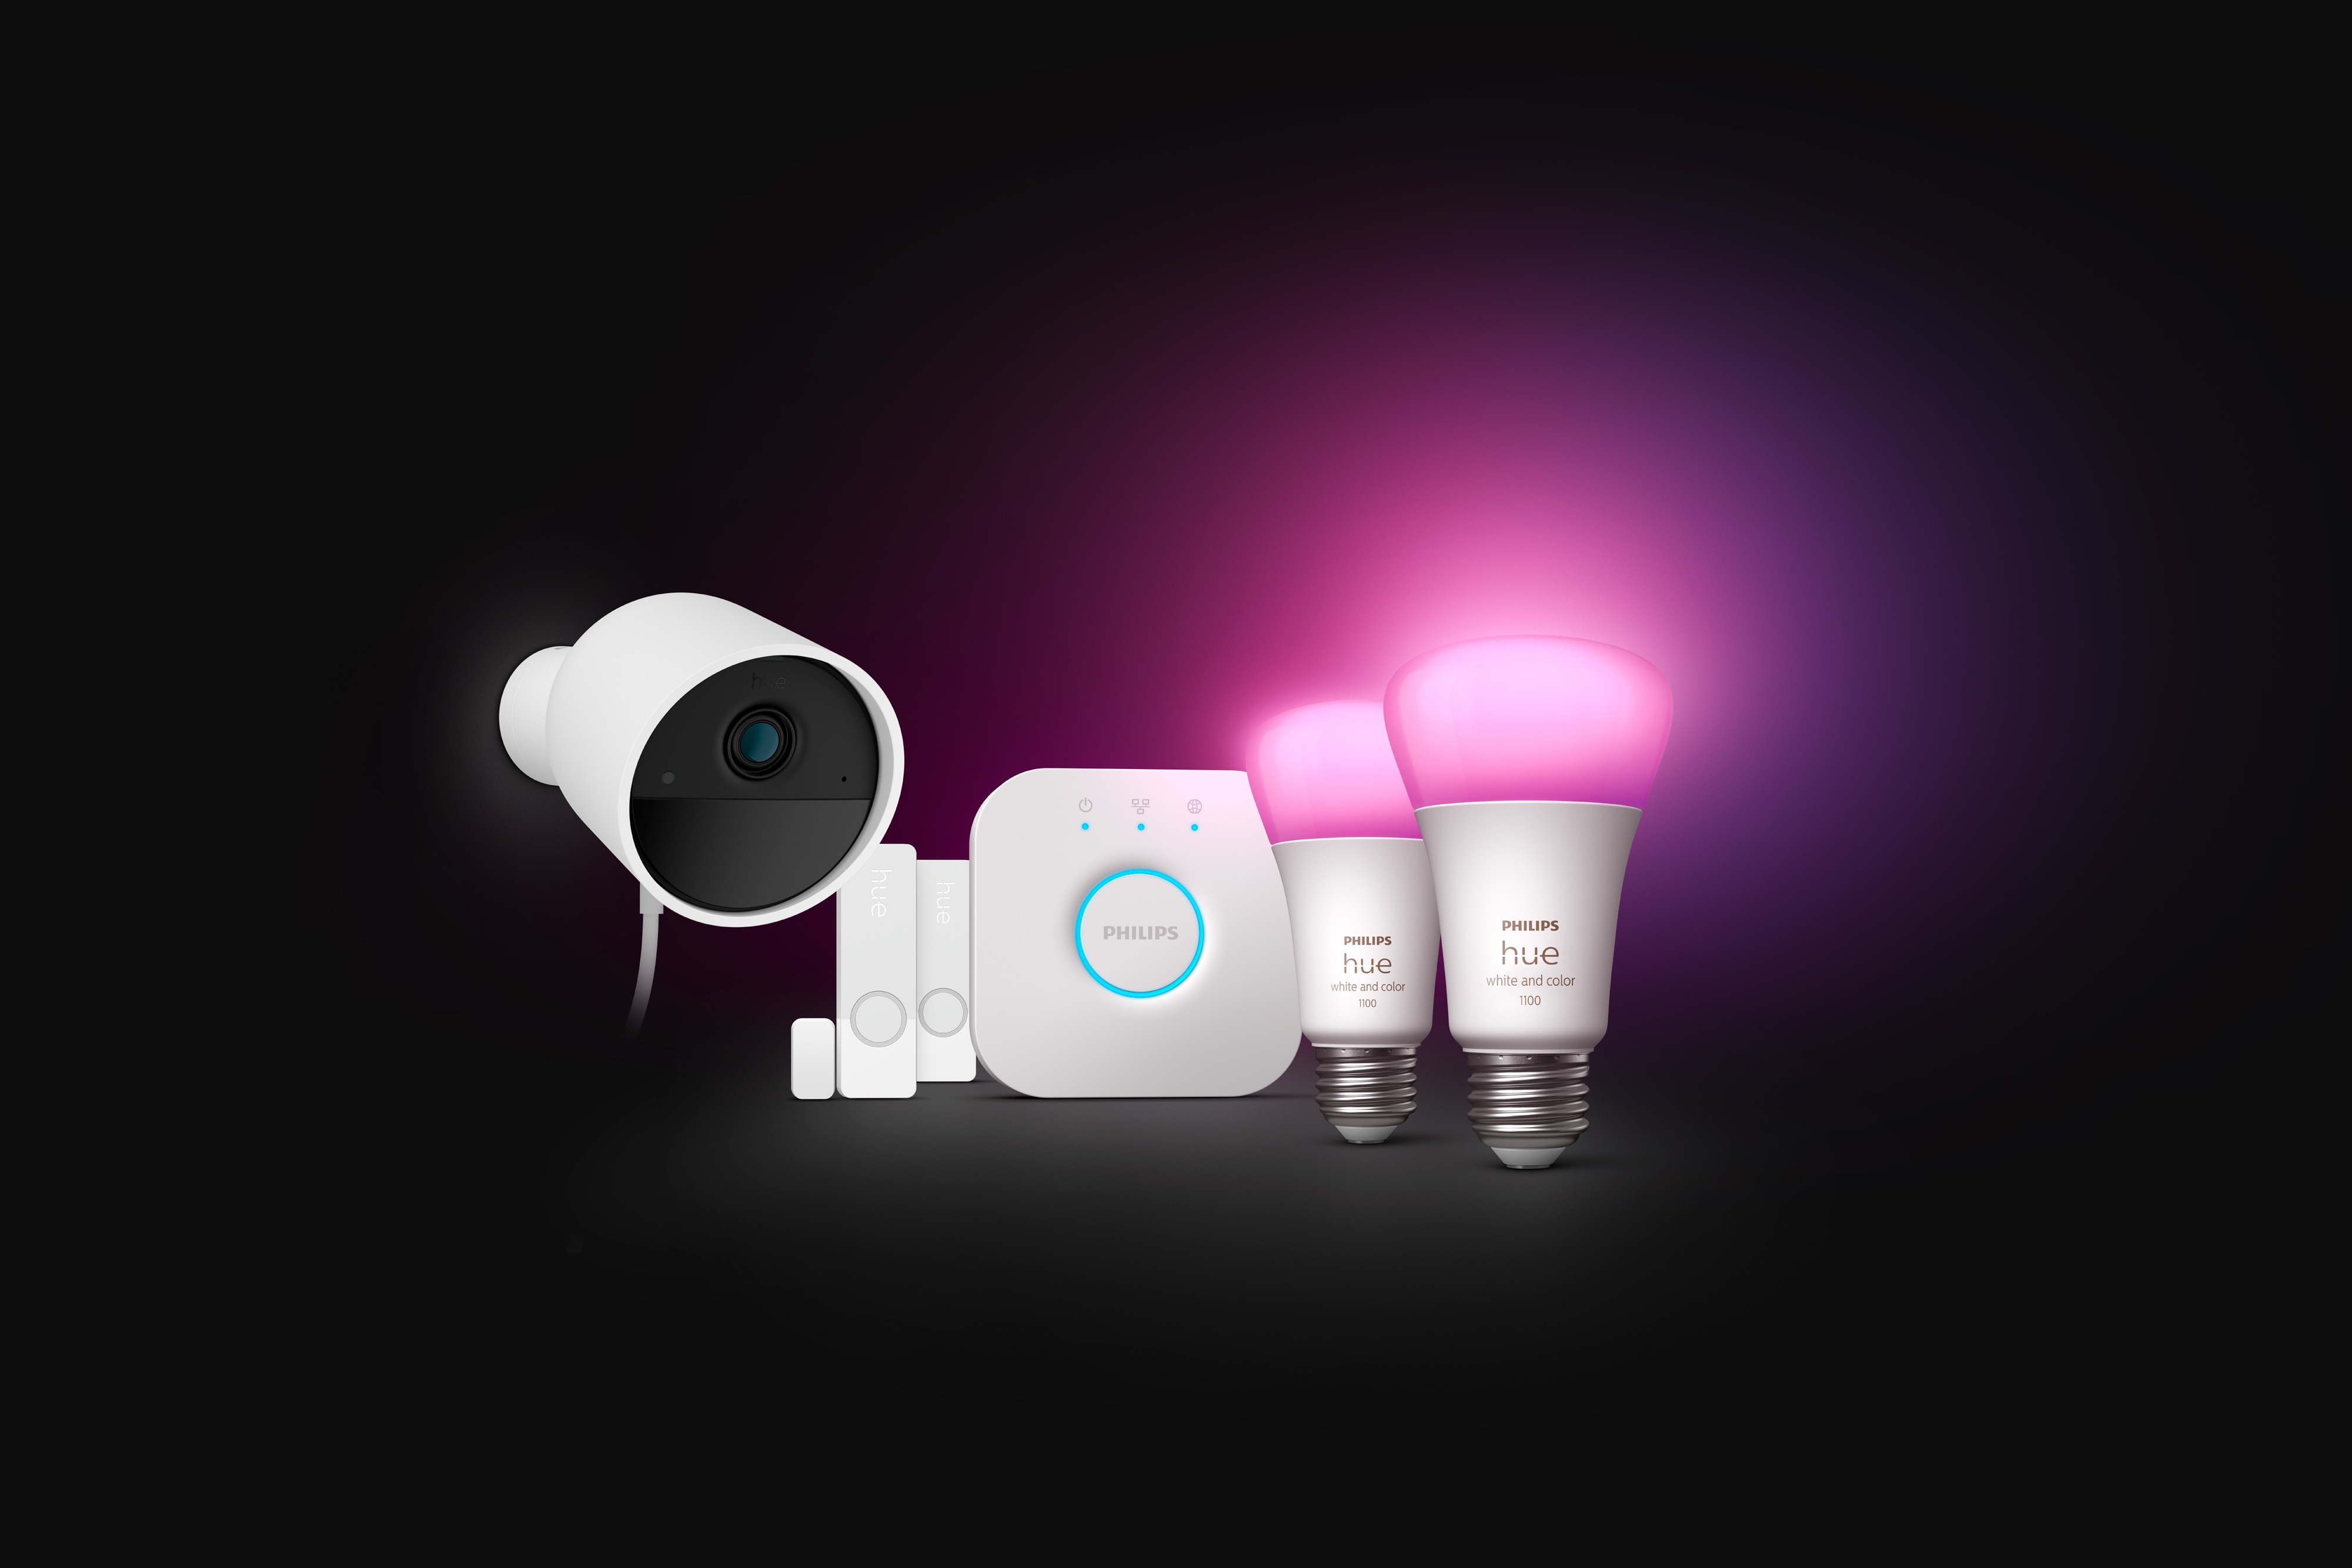 https://www.signify.com/content/dam/signify/en-aa/about/news/2024/20240123-new-philips-hue-launches-offer-more-flexibility-to-design-your-own-lighting-experience/philips-hue-secure-camera-starter-kit.jpg